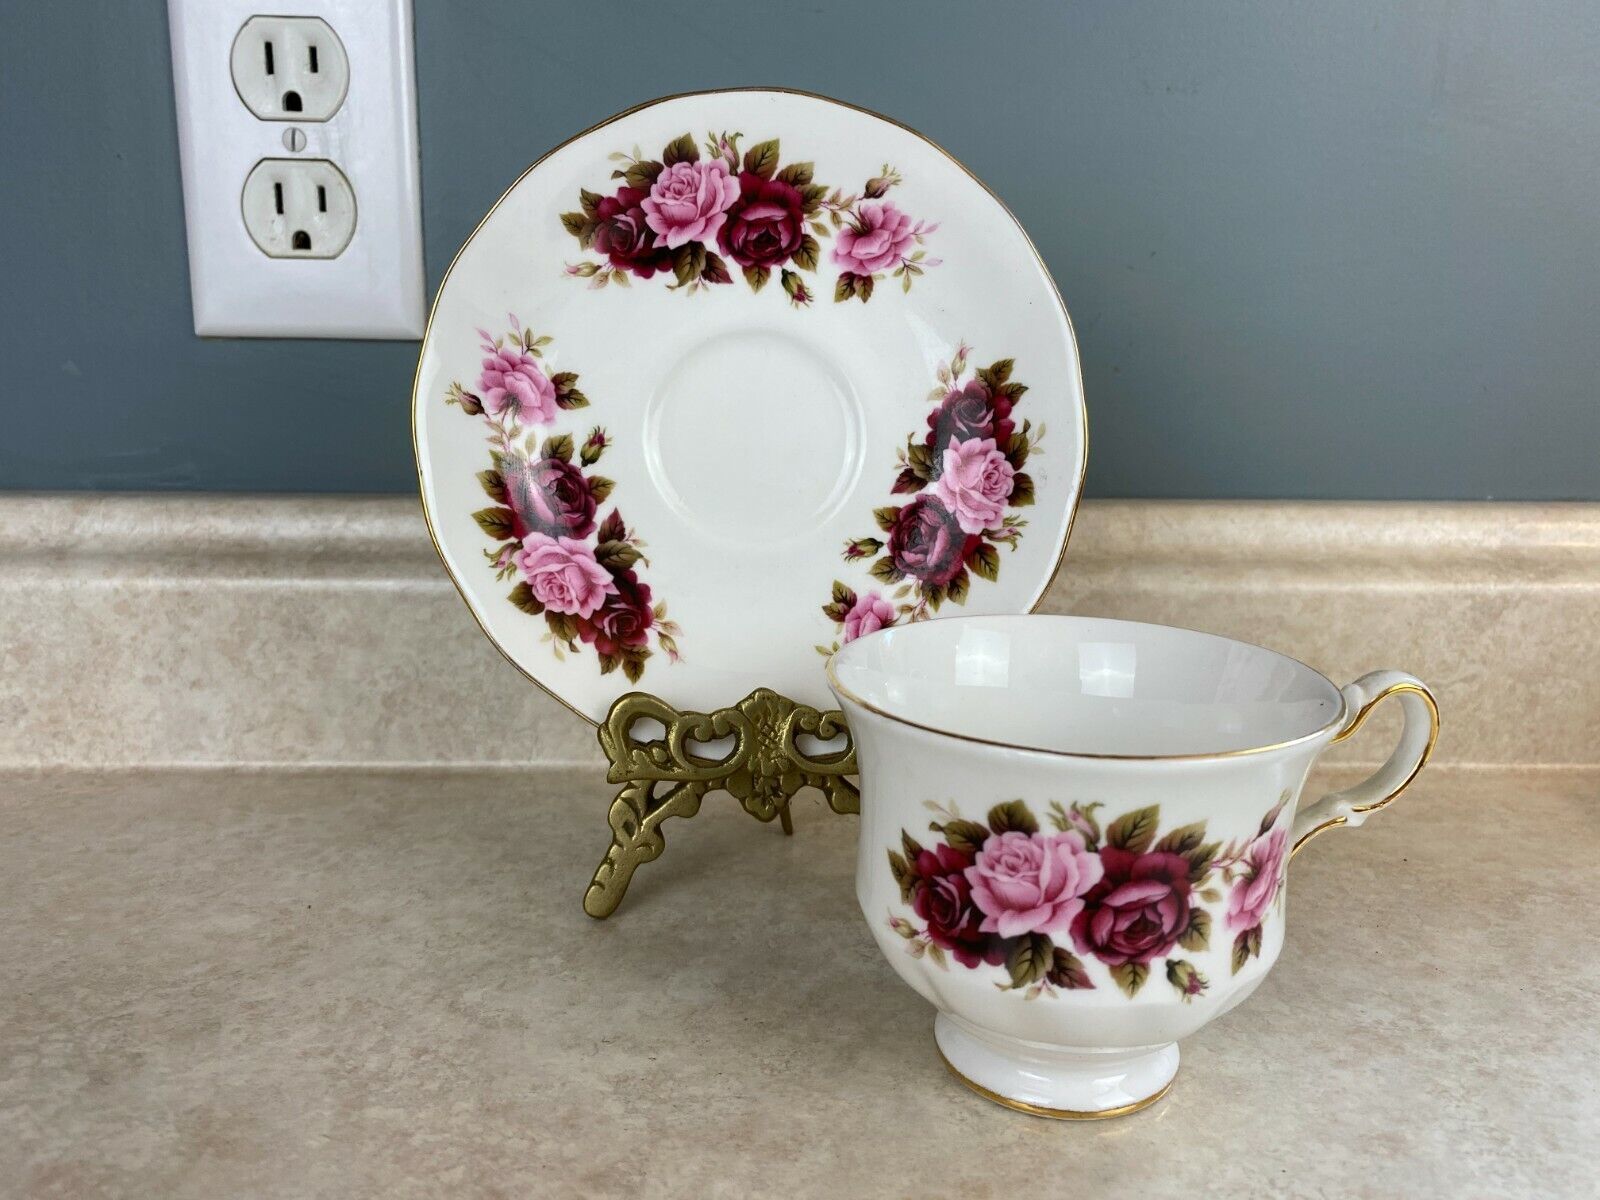 Primary image for Queen Anne A57I England Bone China Rose Beauty Tea Cup And Saucer Set  